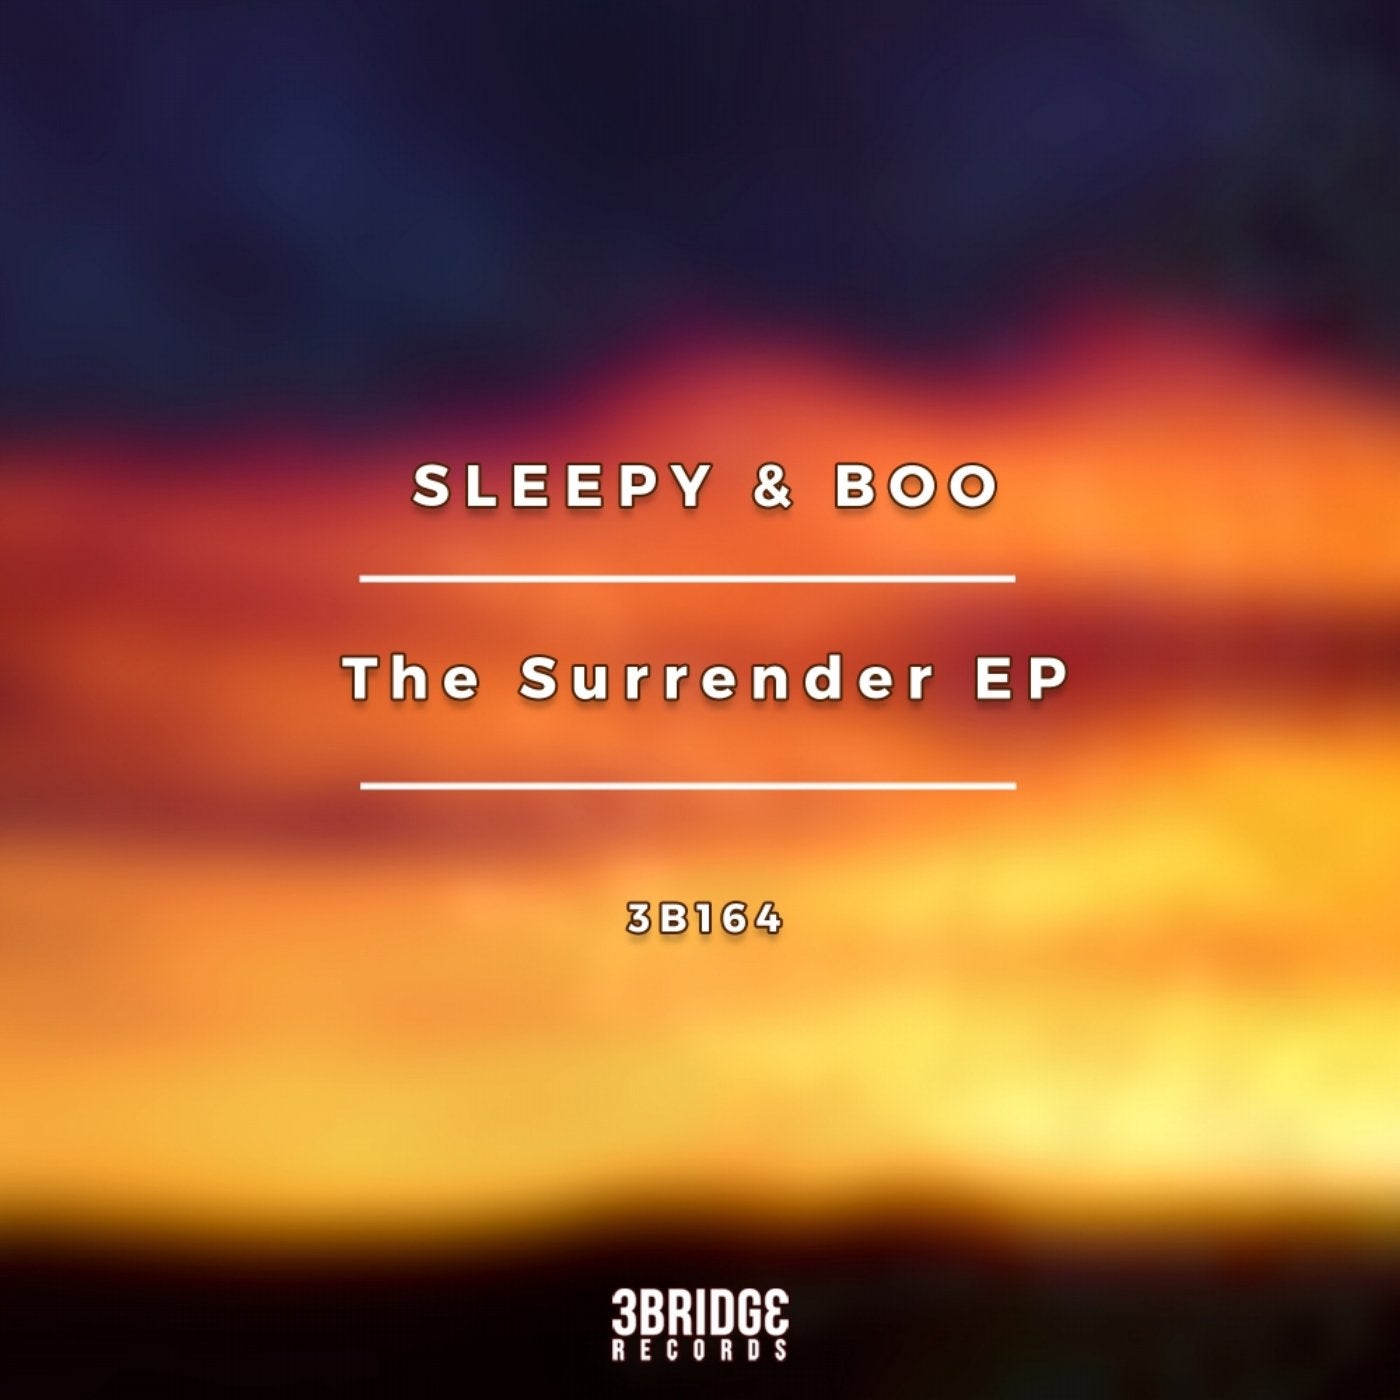 The Surrender EP